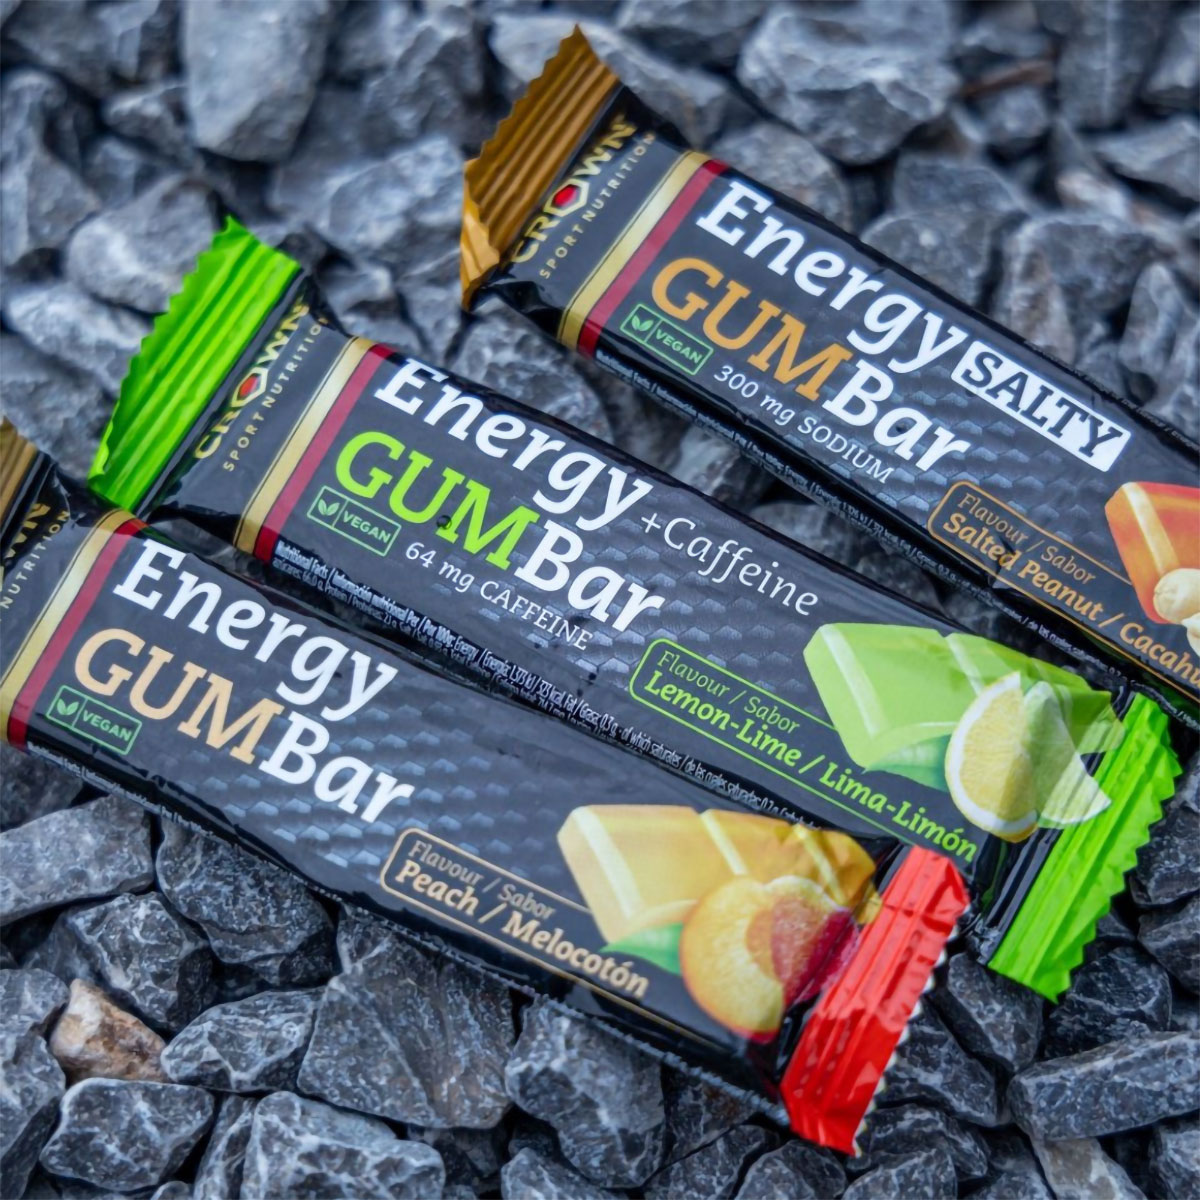 Crown Sport Nutrition Adds Three New Flavors to Their Popular Energy GUM Bar